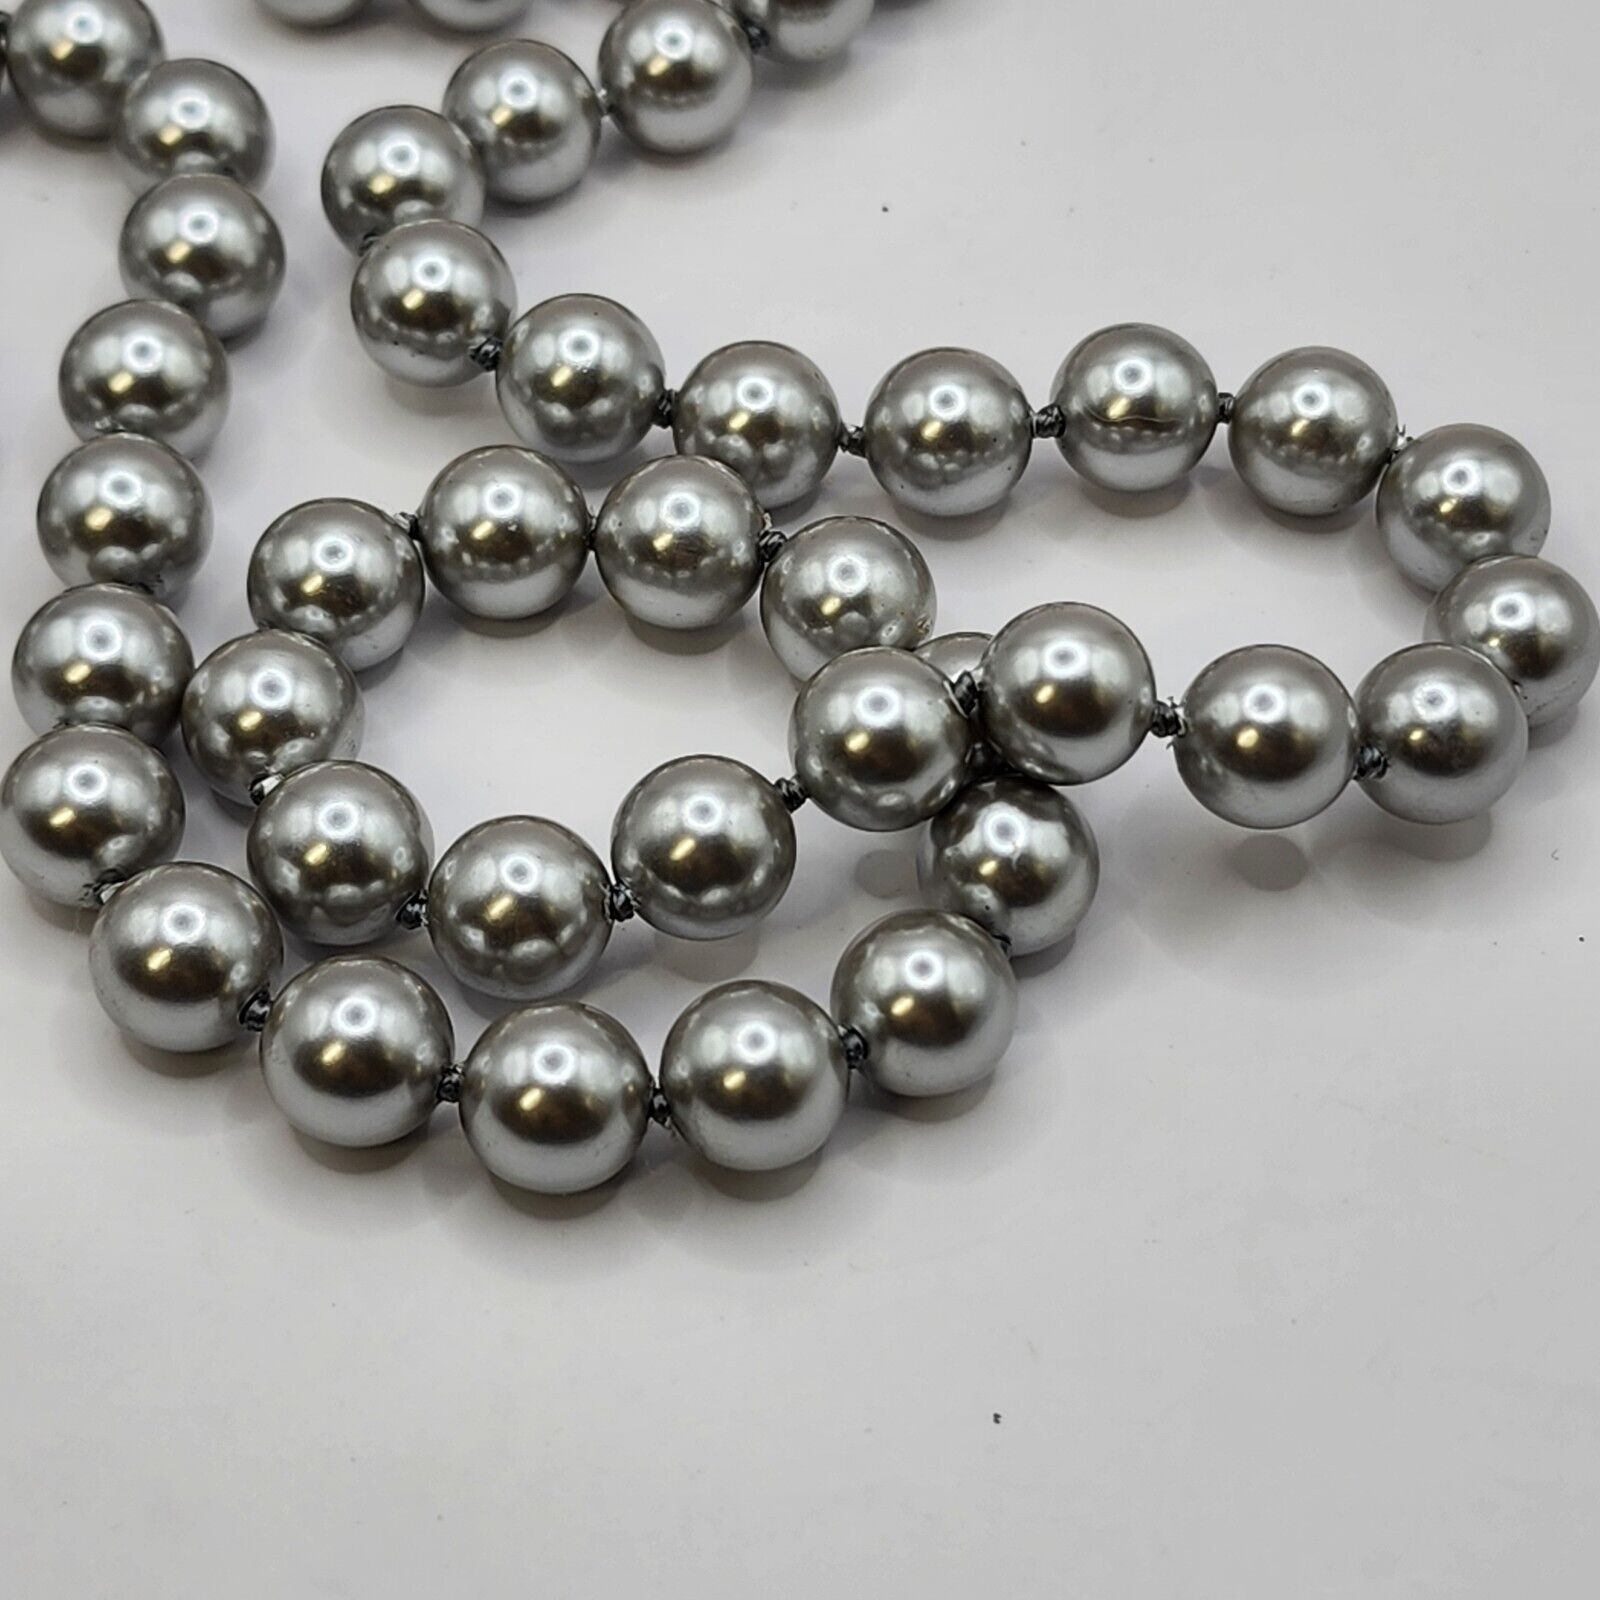 Monet Necklace Silver Tone Ball Signed 32" - image 6